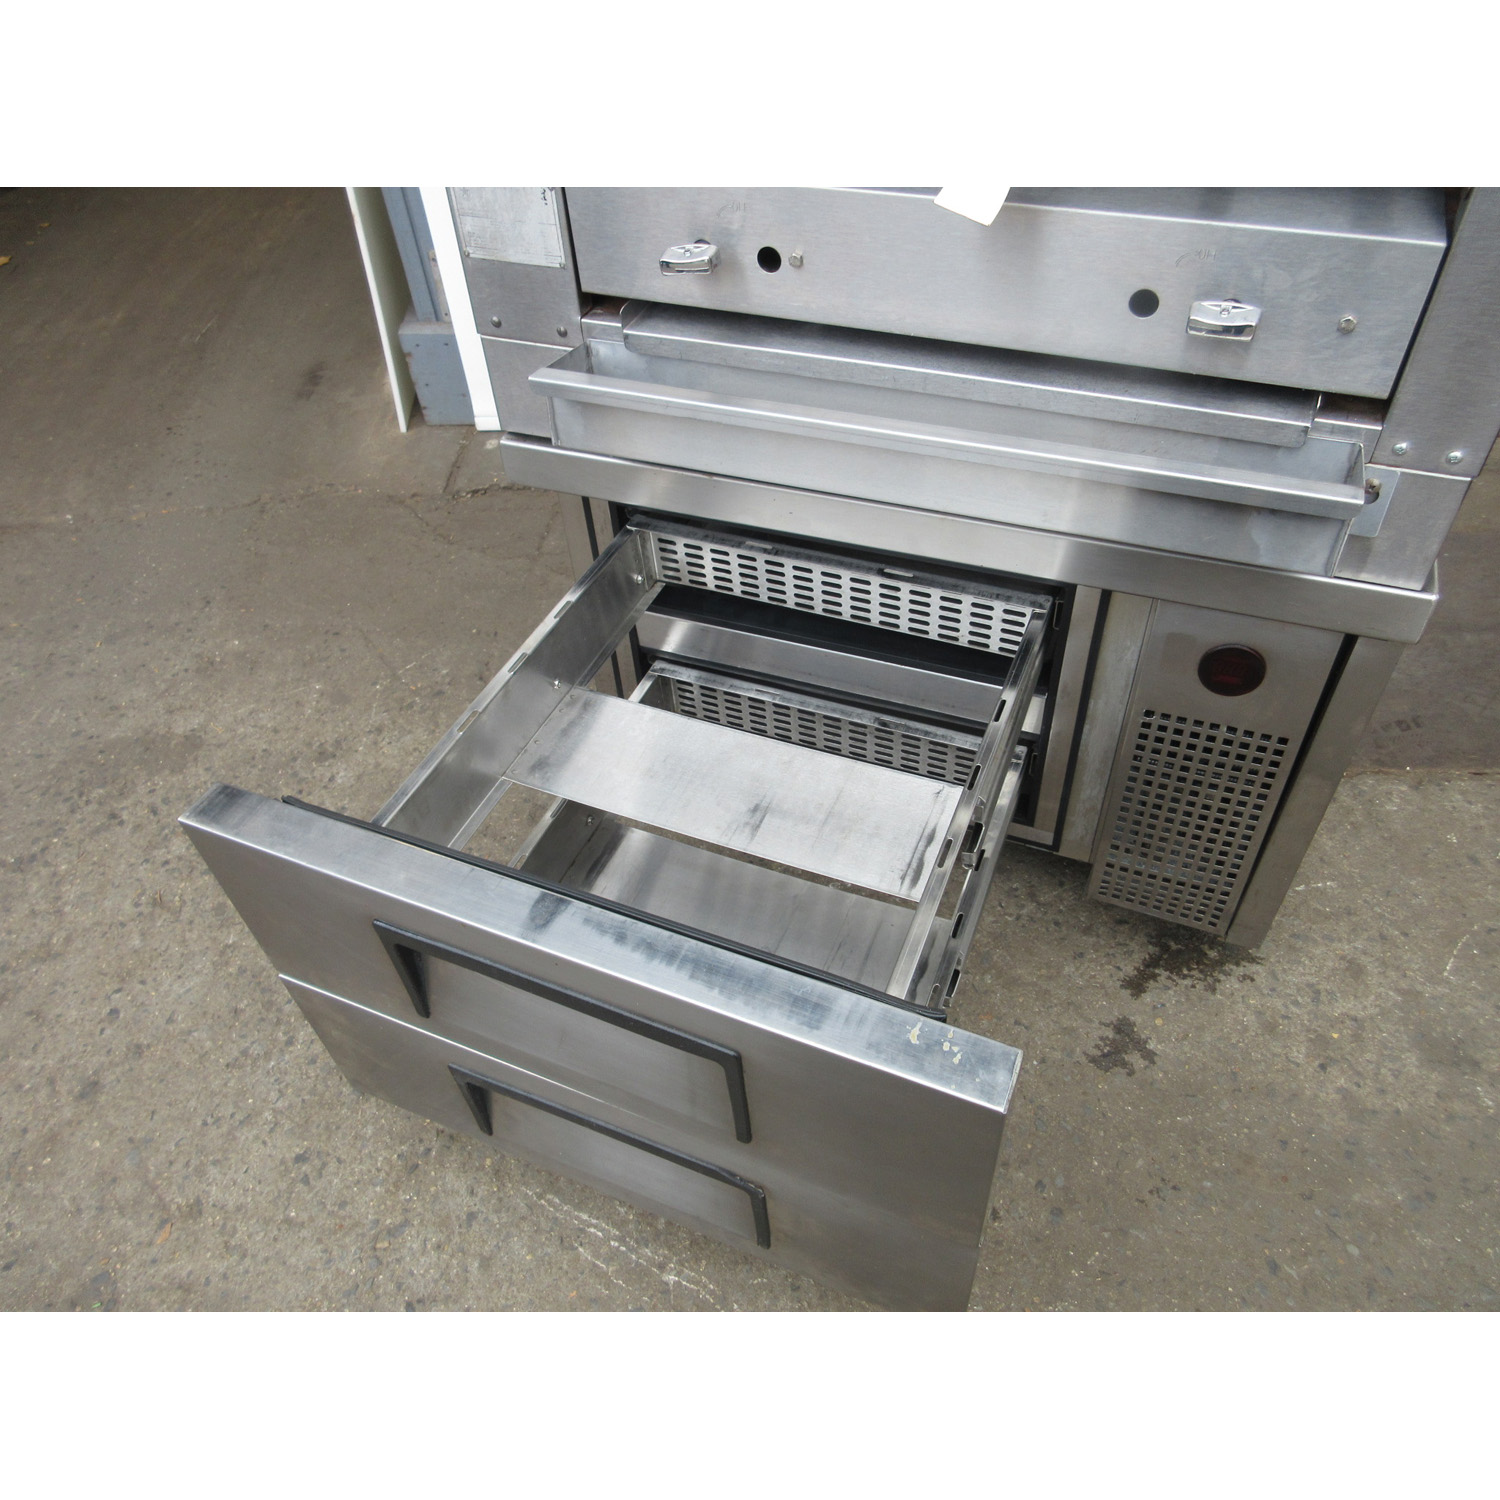 Montague C36 Broiler On True Refrigerated Chef Base, Used Excellent Condition image 3